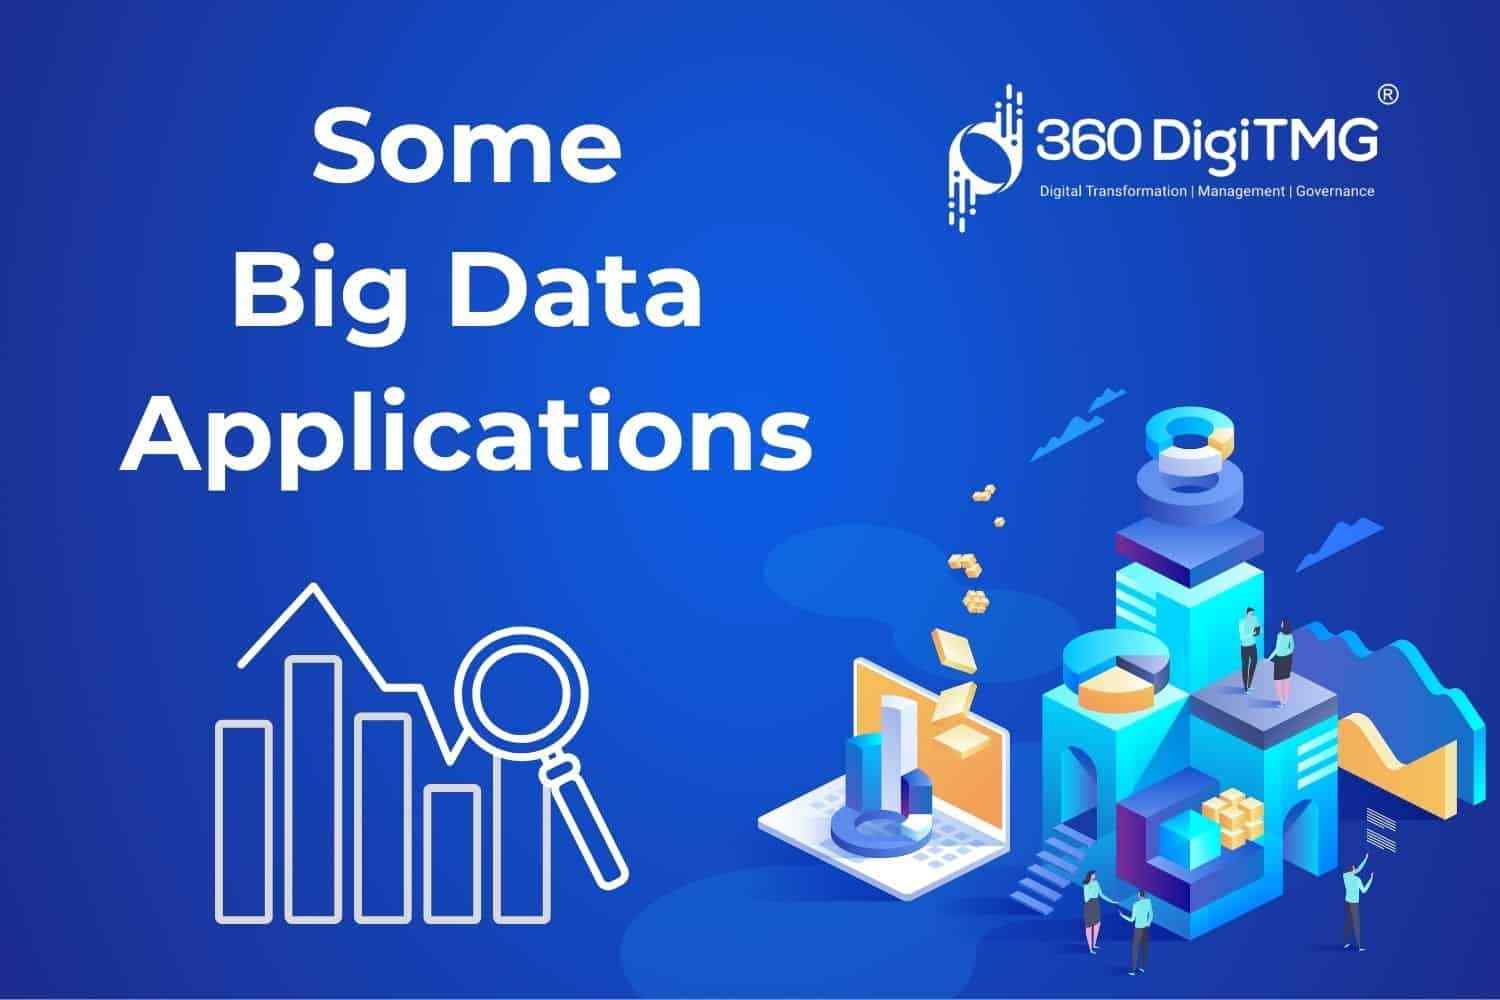 Some Big Data Applications